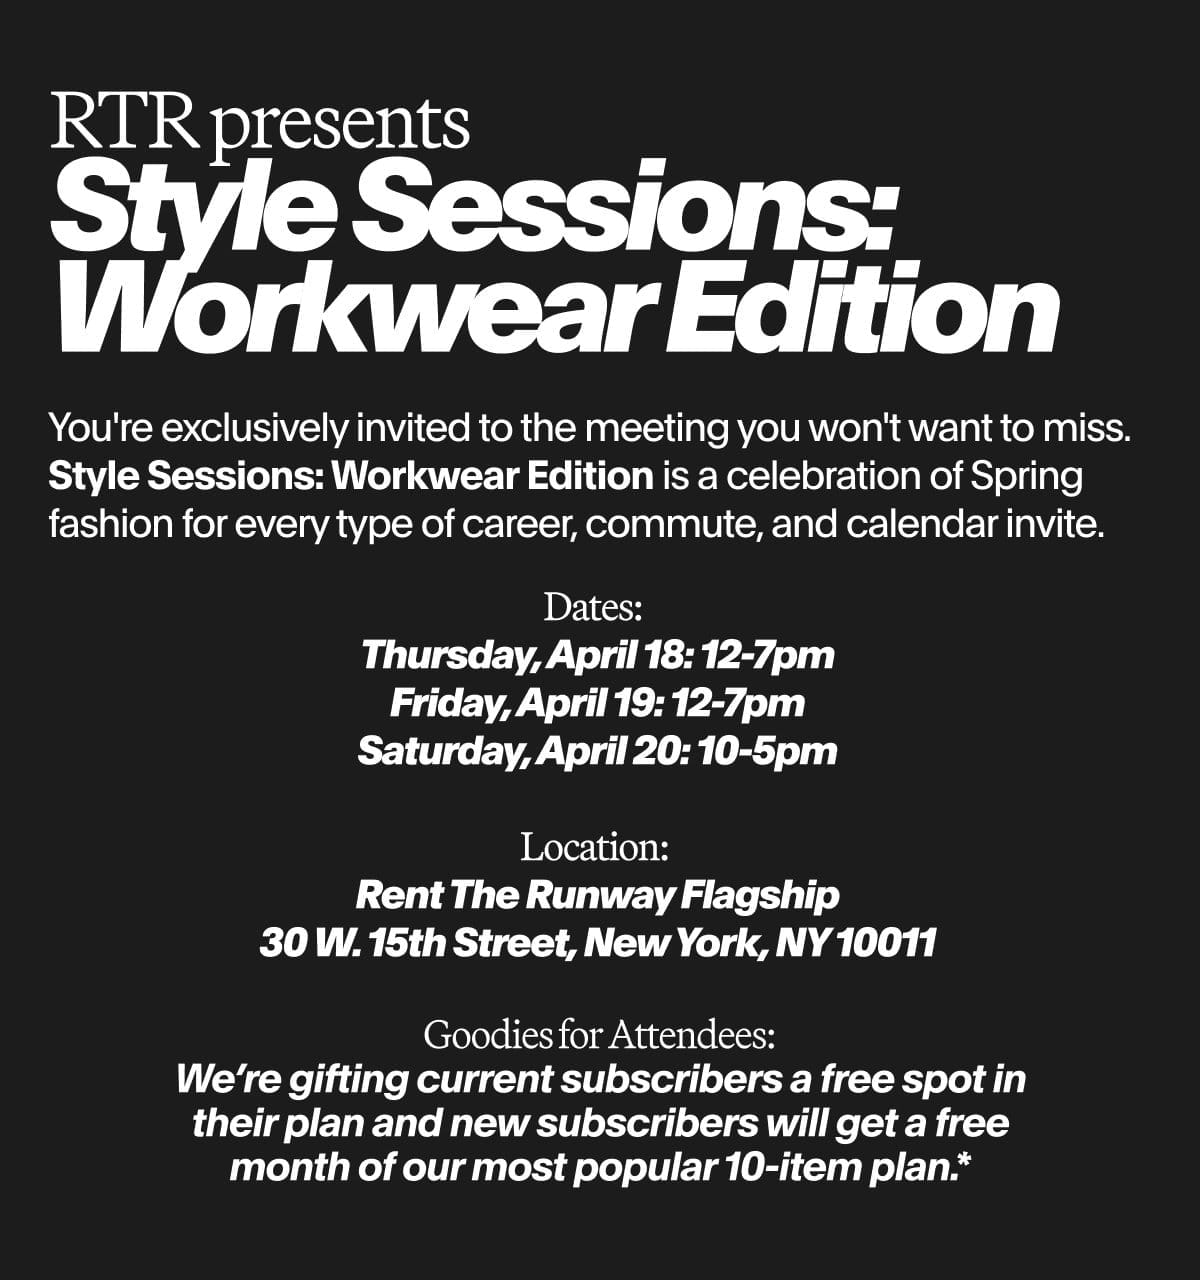 RTR presents: Style Sessions Workwear Edition